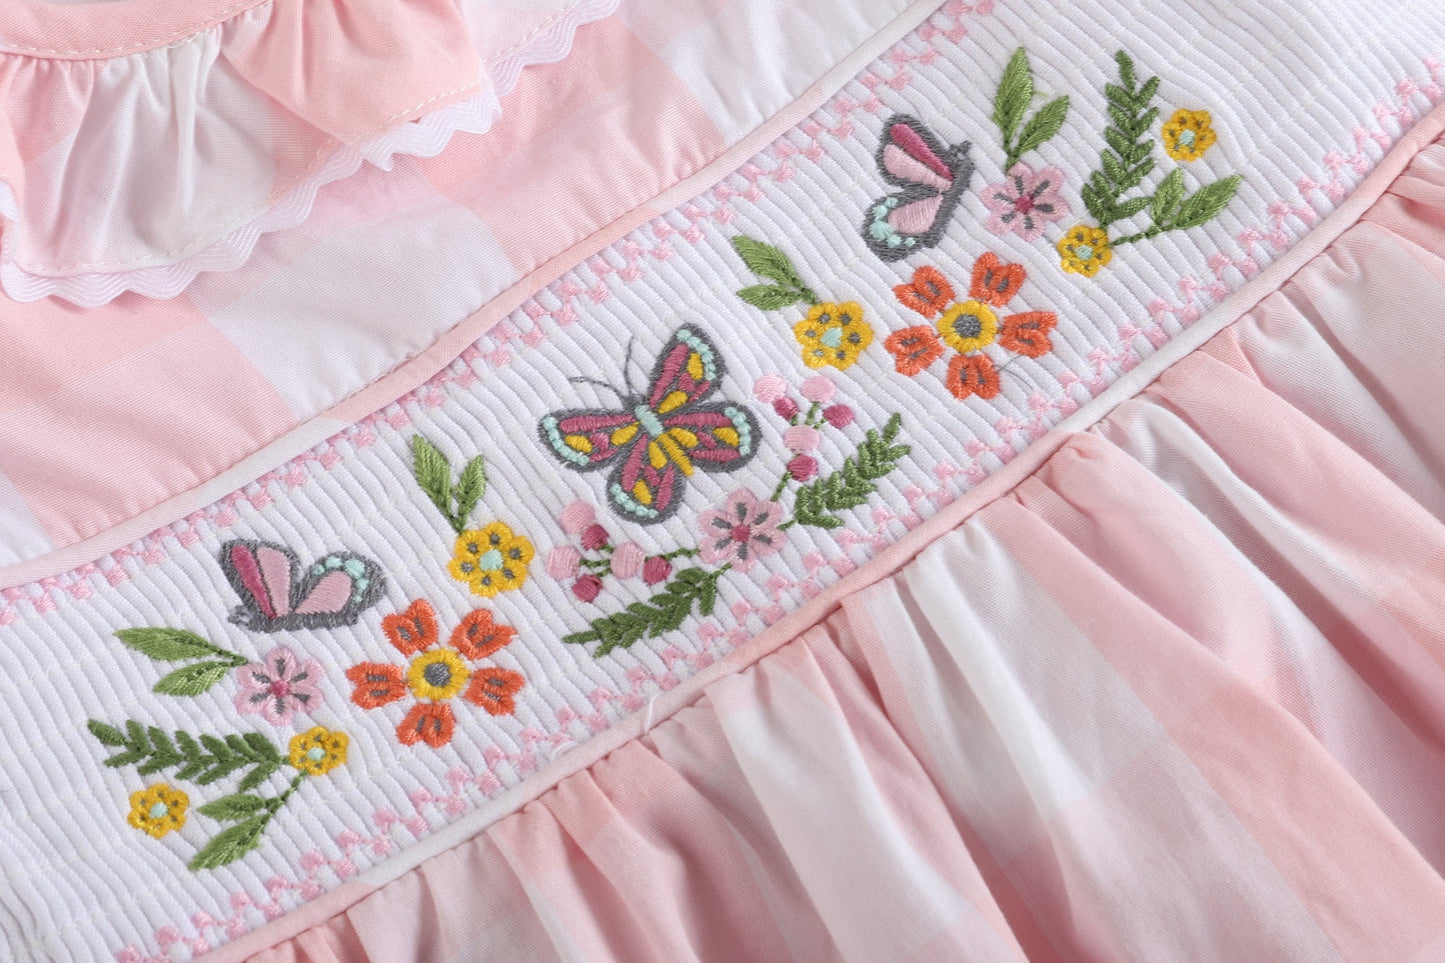 Large Pink Check Butterfly Garden Smocked Dress